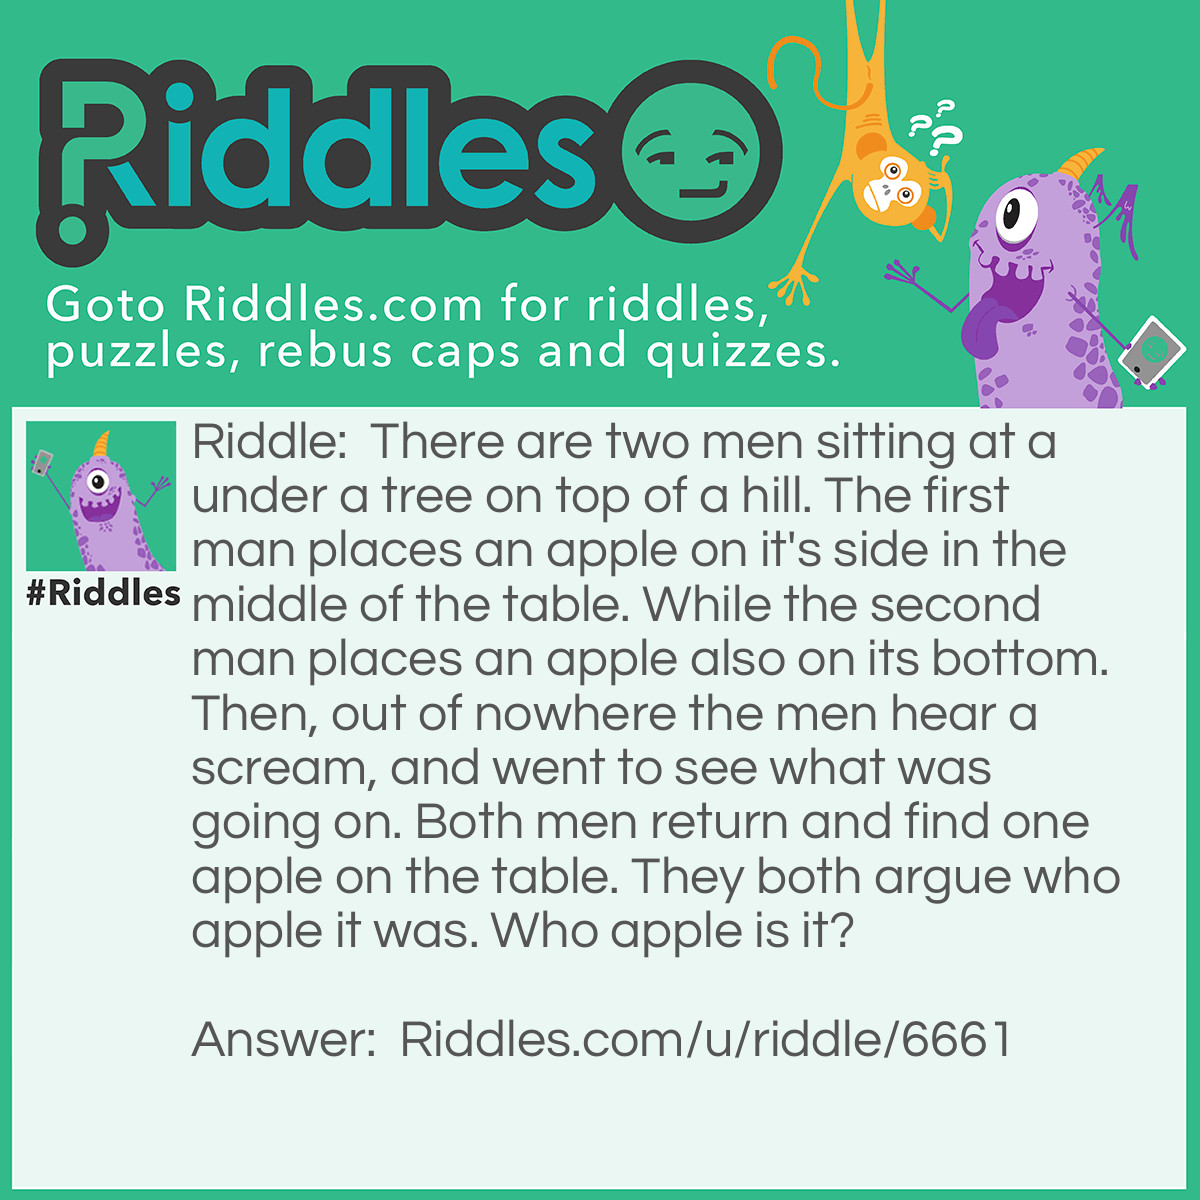 Riddle: There are two men sitting at a under a tree on top of a hill. The first man places an apple on it's side in the middle of the table. While the second man places an apple also on its bottom. Then, out of nowhere the men hear a scream, and went to see what was going on. Both men return and find one apple on the table. They both argue who apple it was. Who apple is it? Answer: It's the second mans apple. Because he placed his apple on it's bottom. While the other man places his on it's side. So, the wind could have took it downhill.